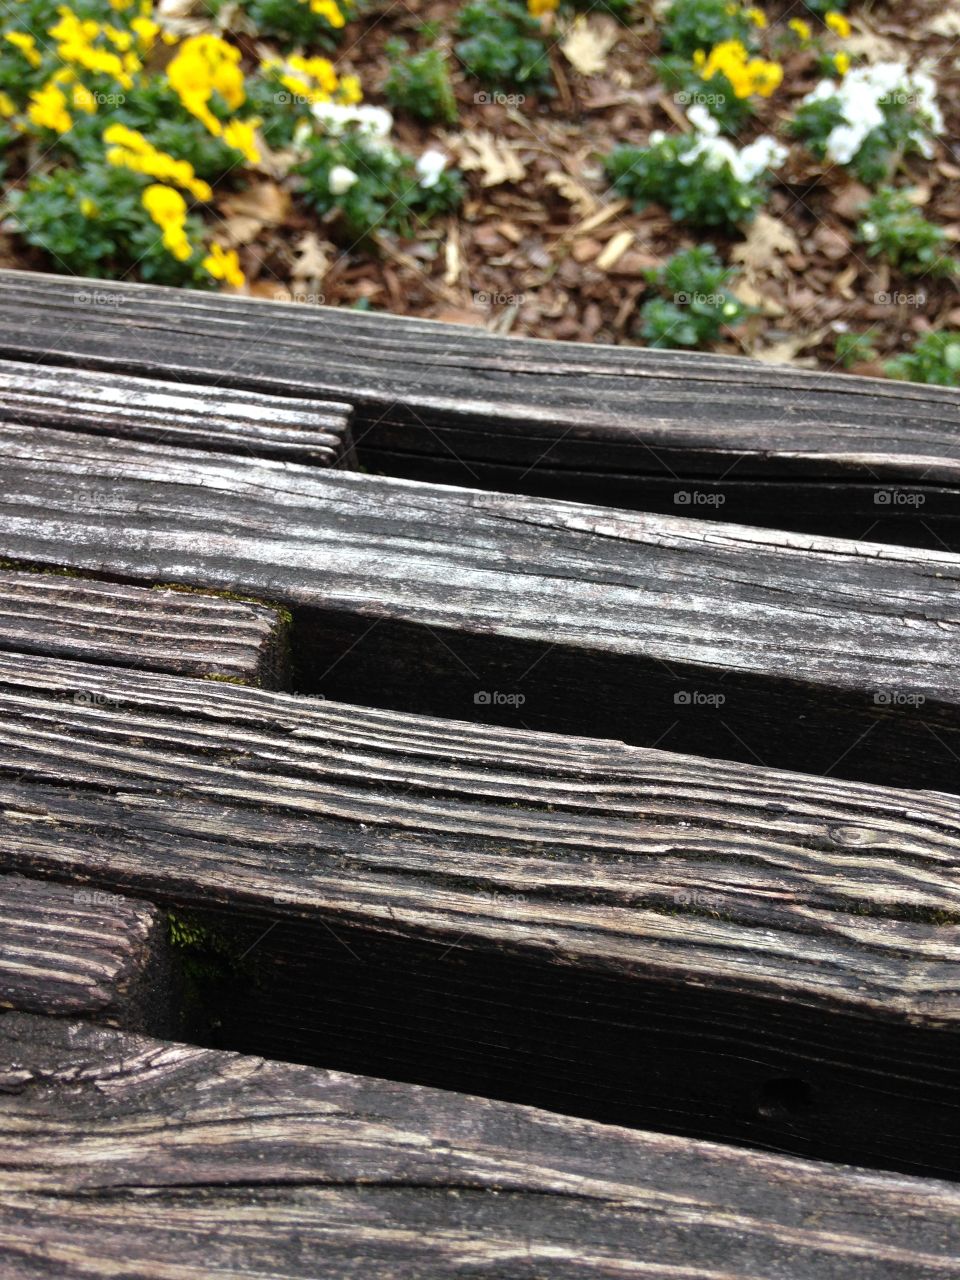 Wooden bench with yellow flowers in background